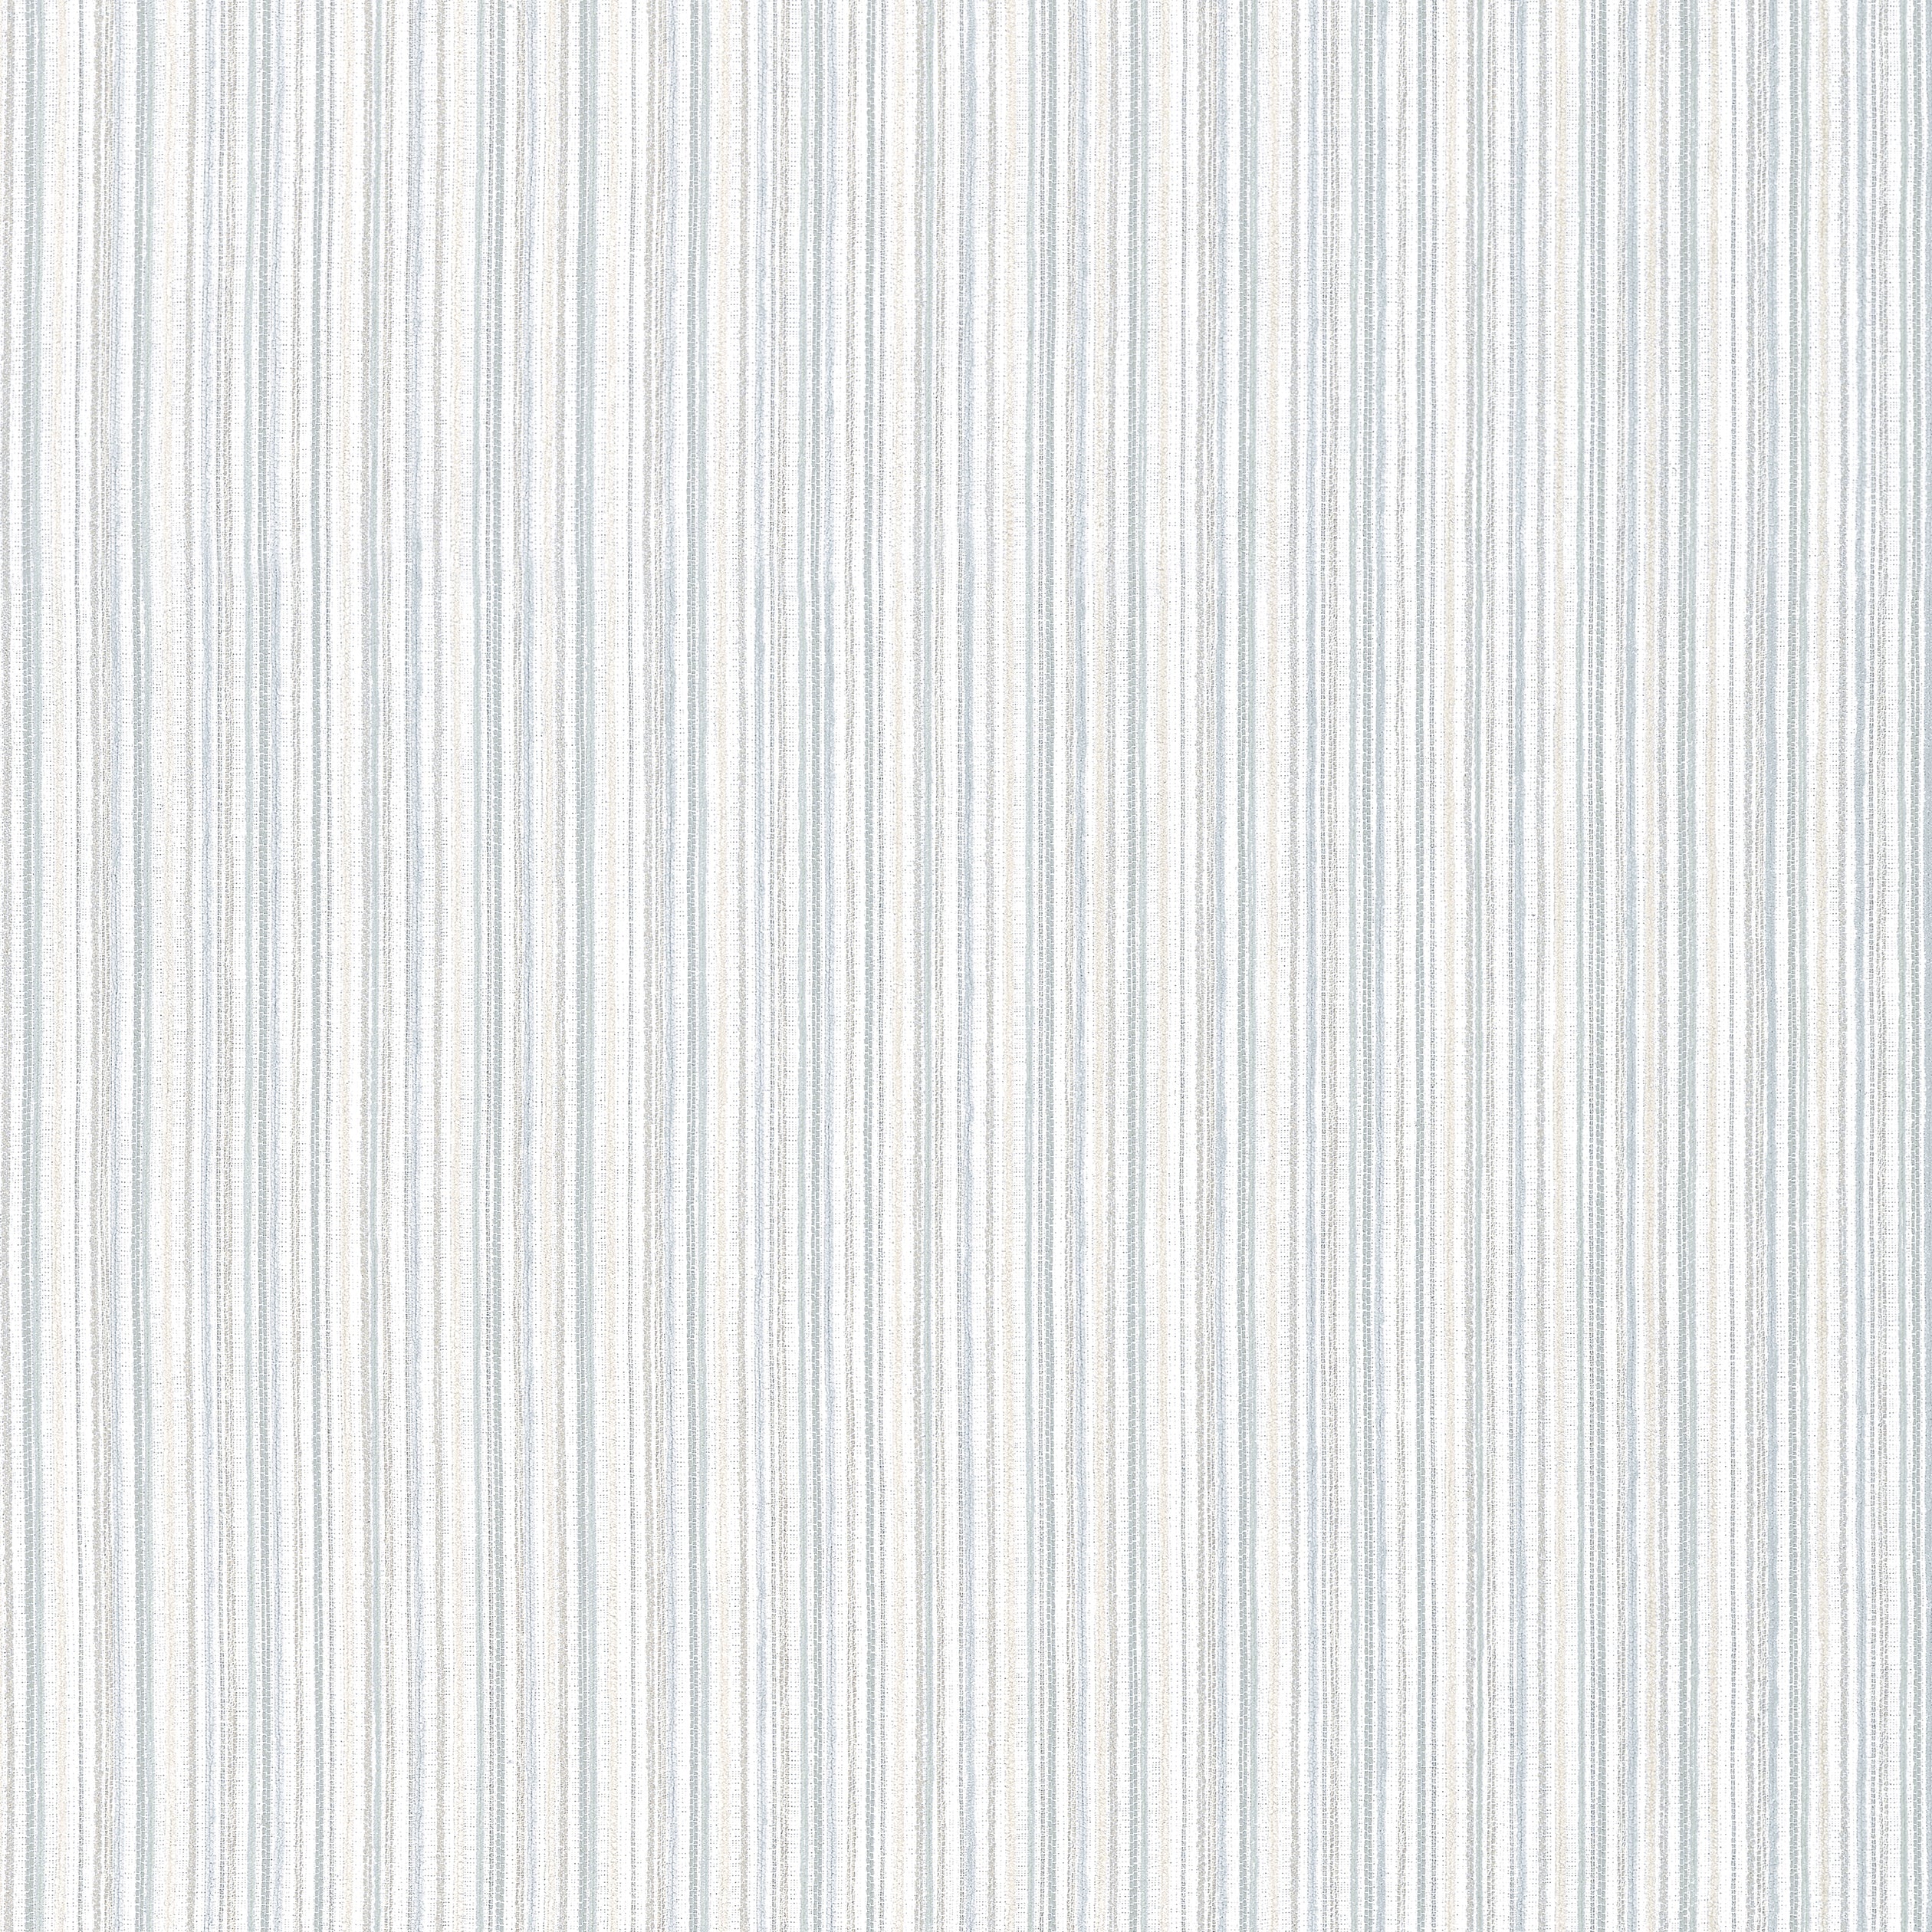 Ernie Stripe fabric in glacier color - pattern number W81942 - by Thibaut in the Companions collection